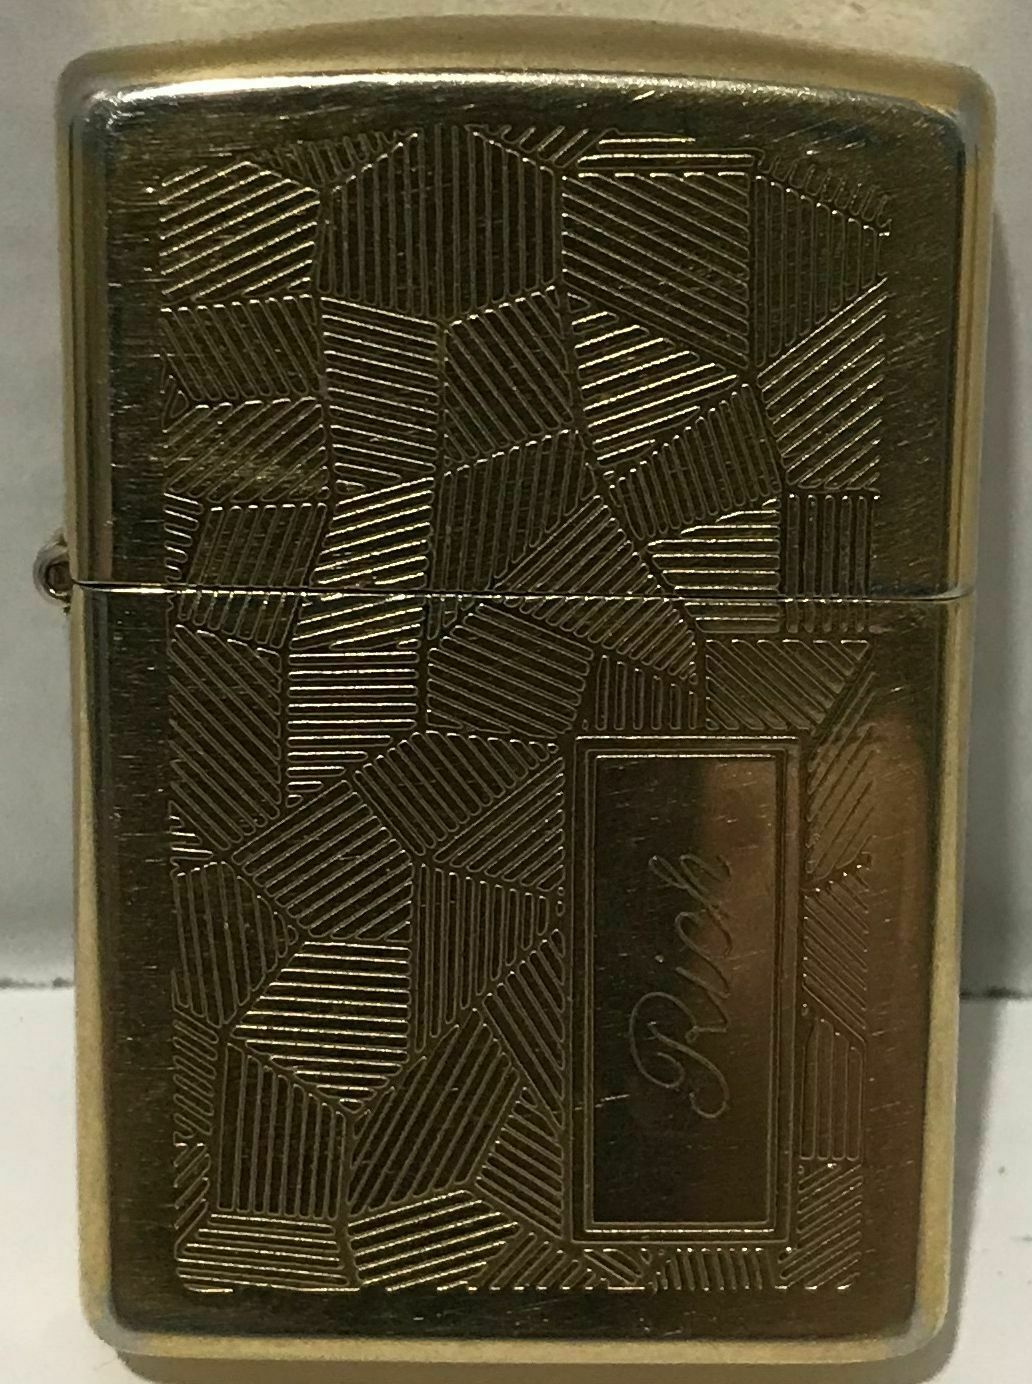 {VINTAGE} Zippo Gold Plated Lighter Engraved with the word 